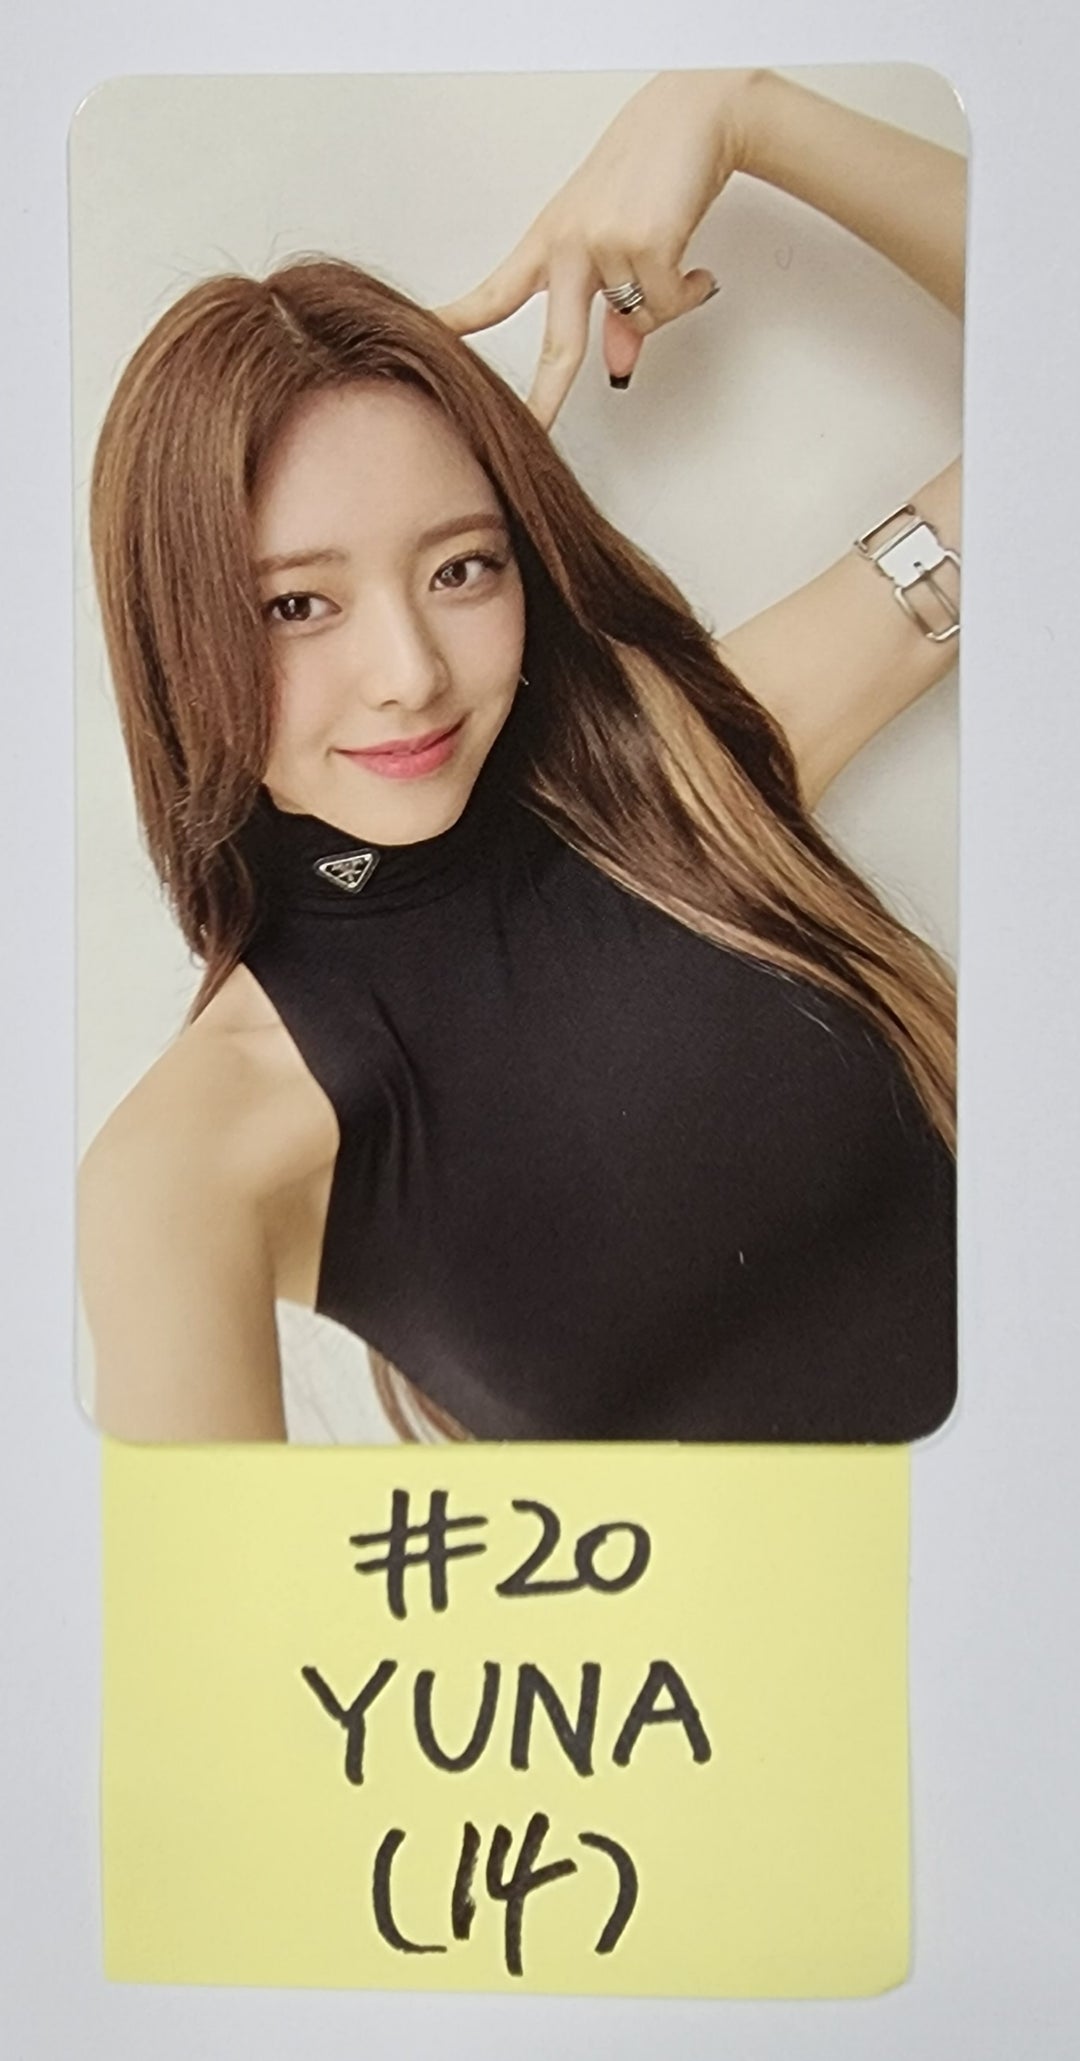 ITZY 'CHESHIRE' - Official Photocard [Standard Edition]